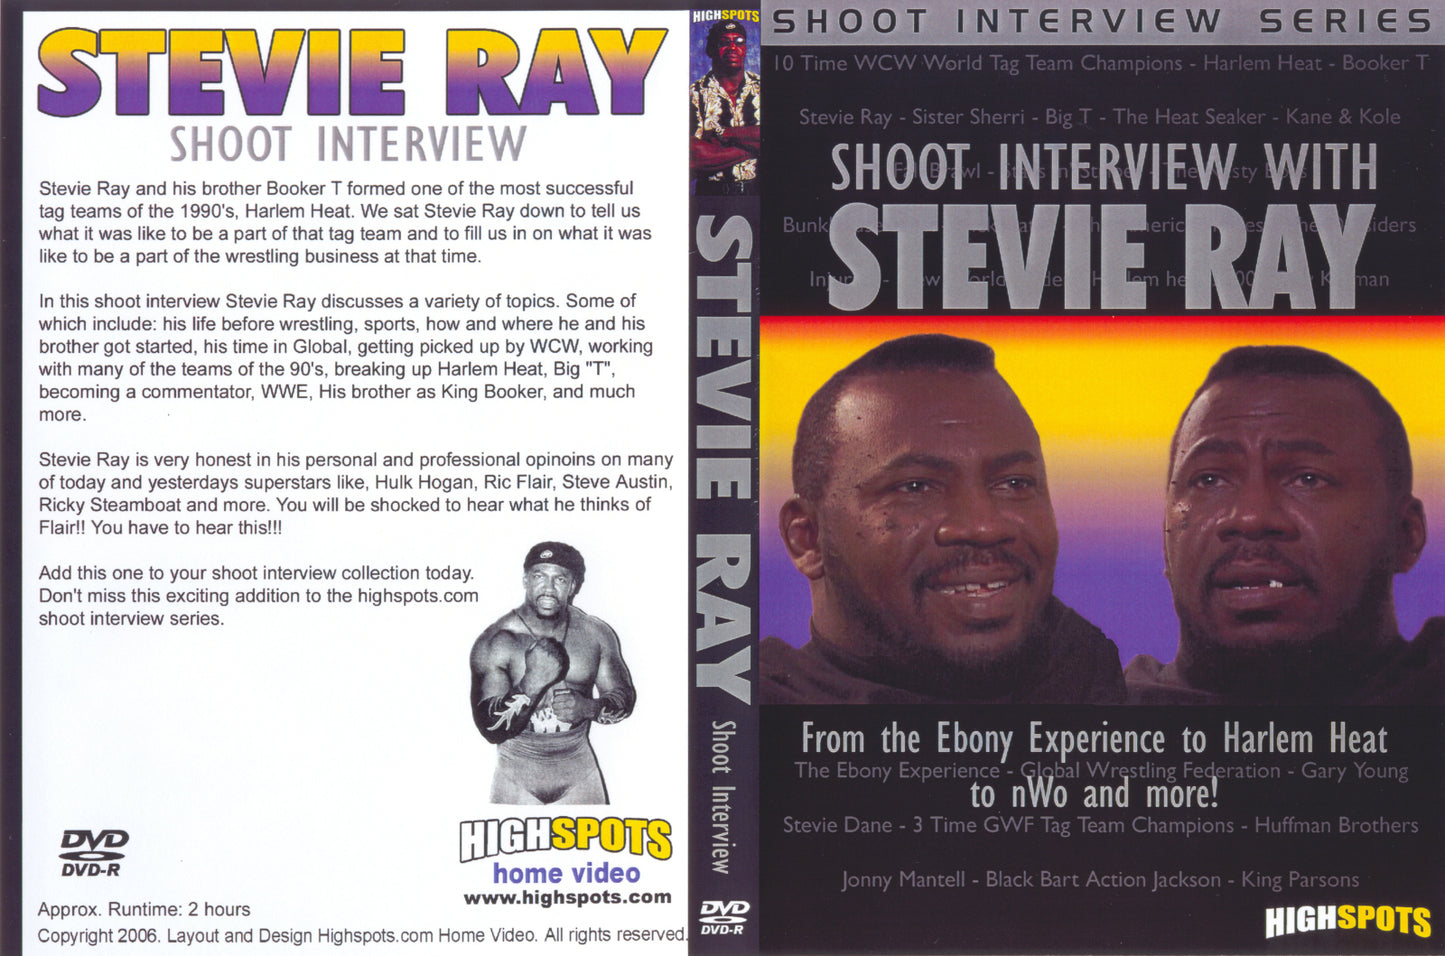 stevie ray shoot interview